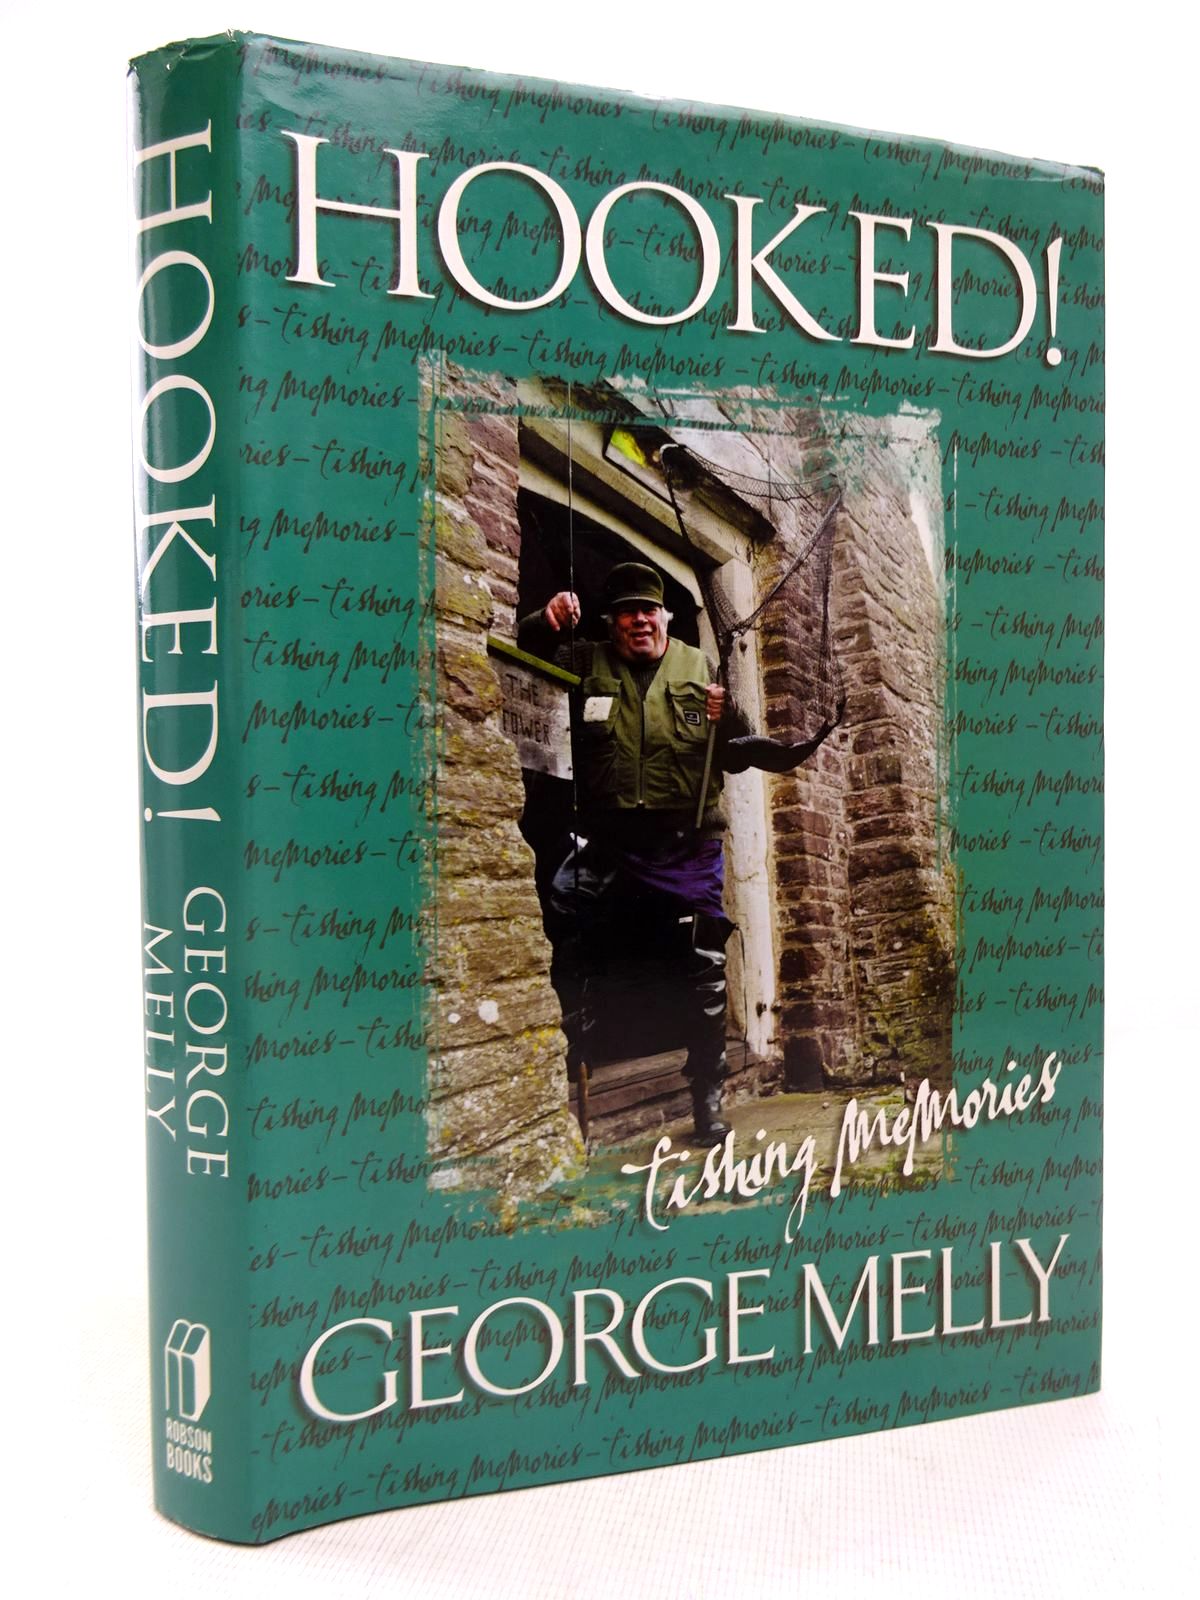 Photo of HOOKED! FISHING MEMORIES written by Melly, George published by Robson Books (STOCK CODE: 1816647)  for sale by Stella & Rose's Books